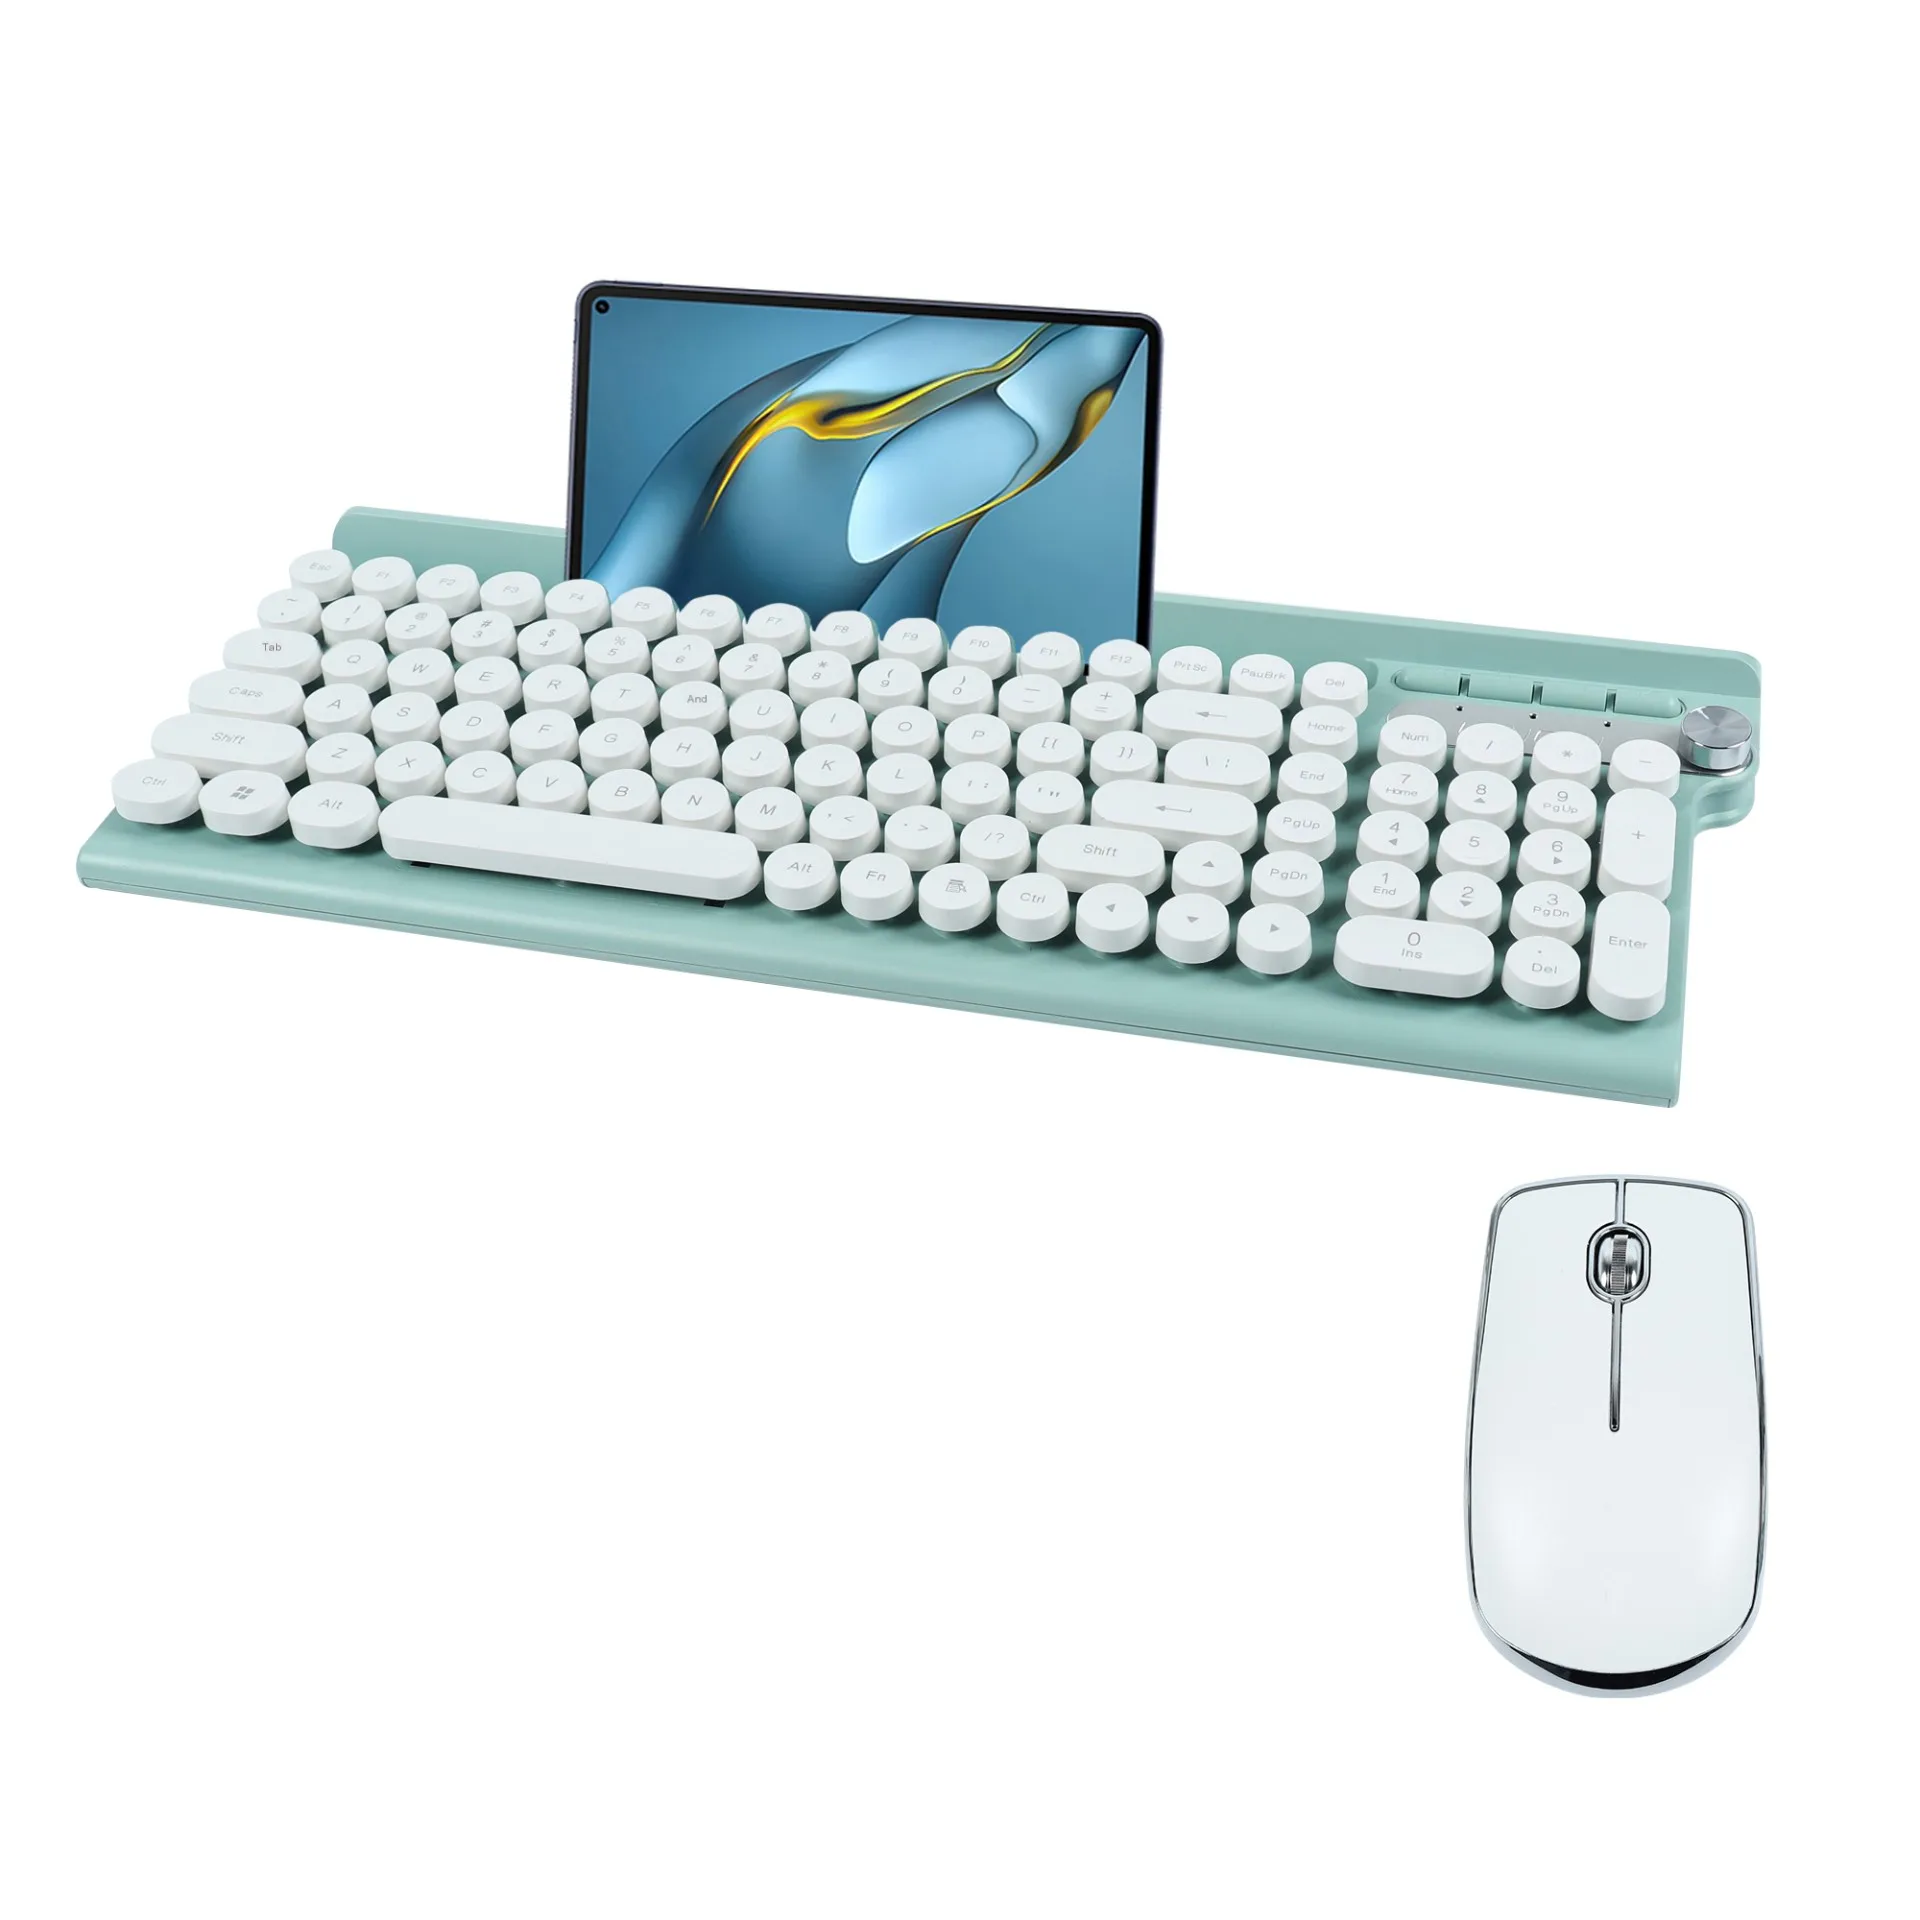 

Fashionable And Convenient 2.4G Rechargeable Wireless Silent Keyboard And Mouse Set For PC Mac Laptop Tablet Keycaps 104 Key